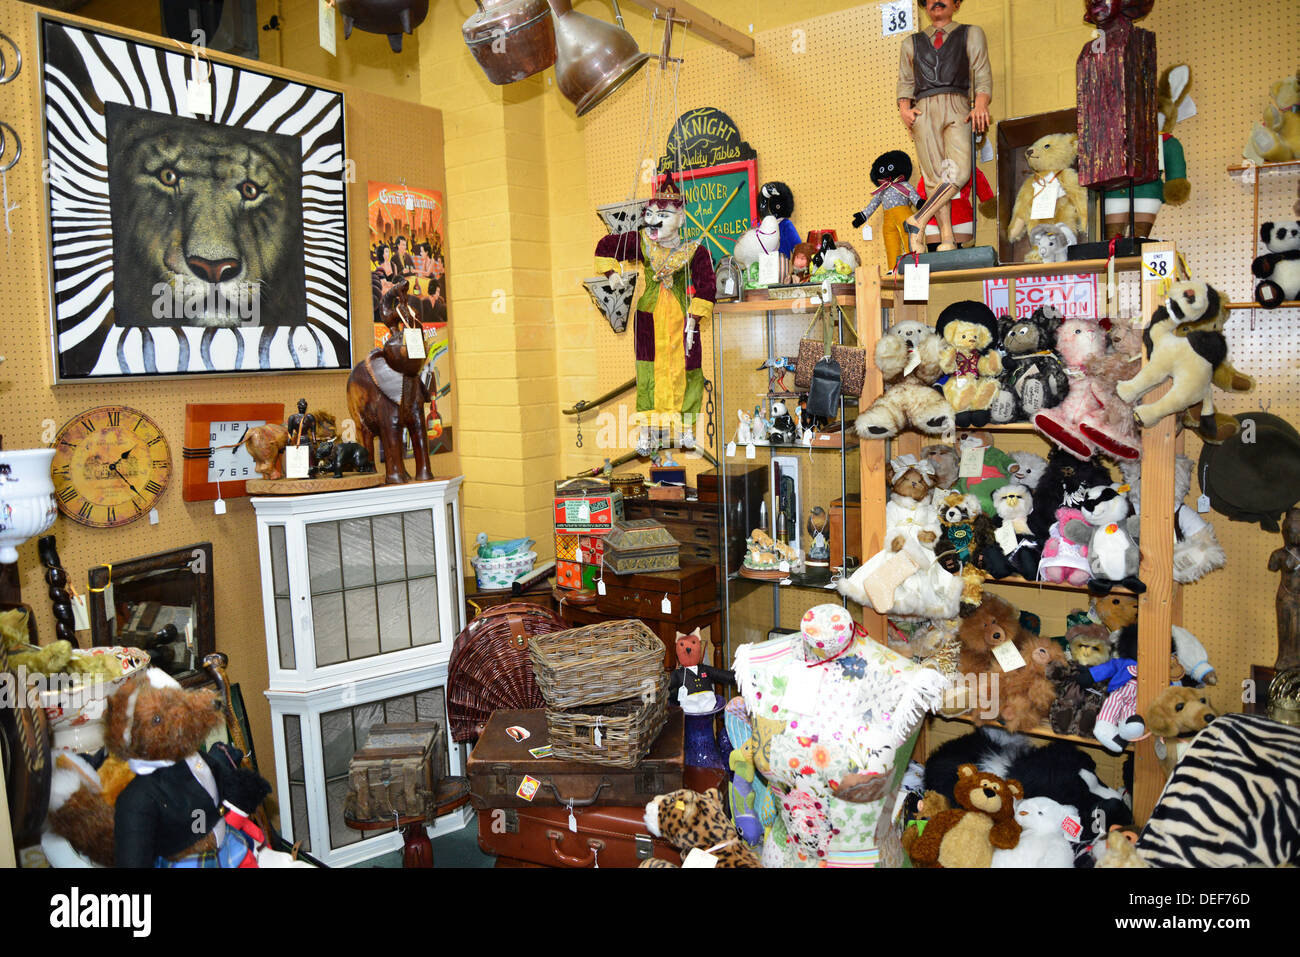 Antiques and collectables at Brackley Antique Cellar, Draymans Walk, Brackley, Northamptonshire, England, United Kingdom Stock Photo